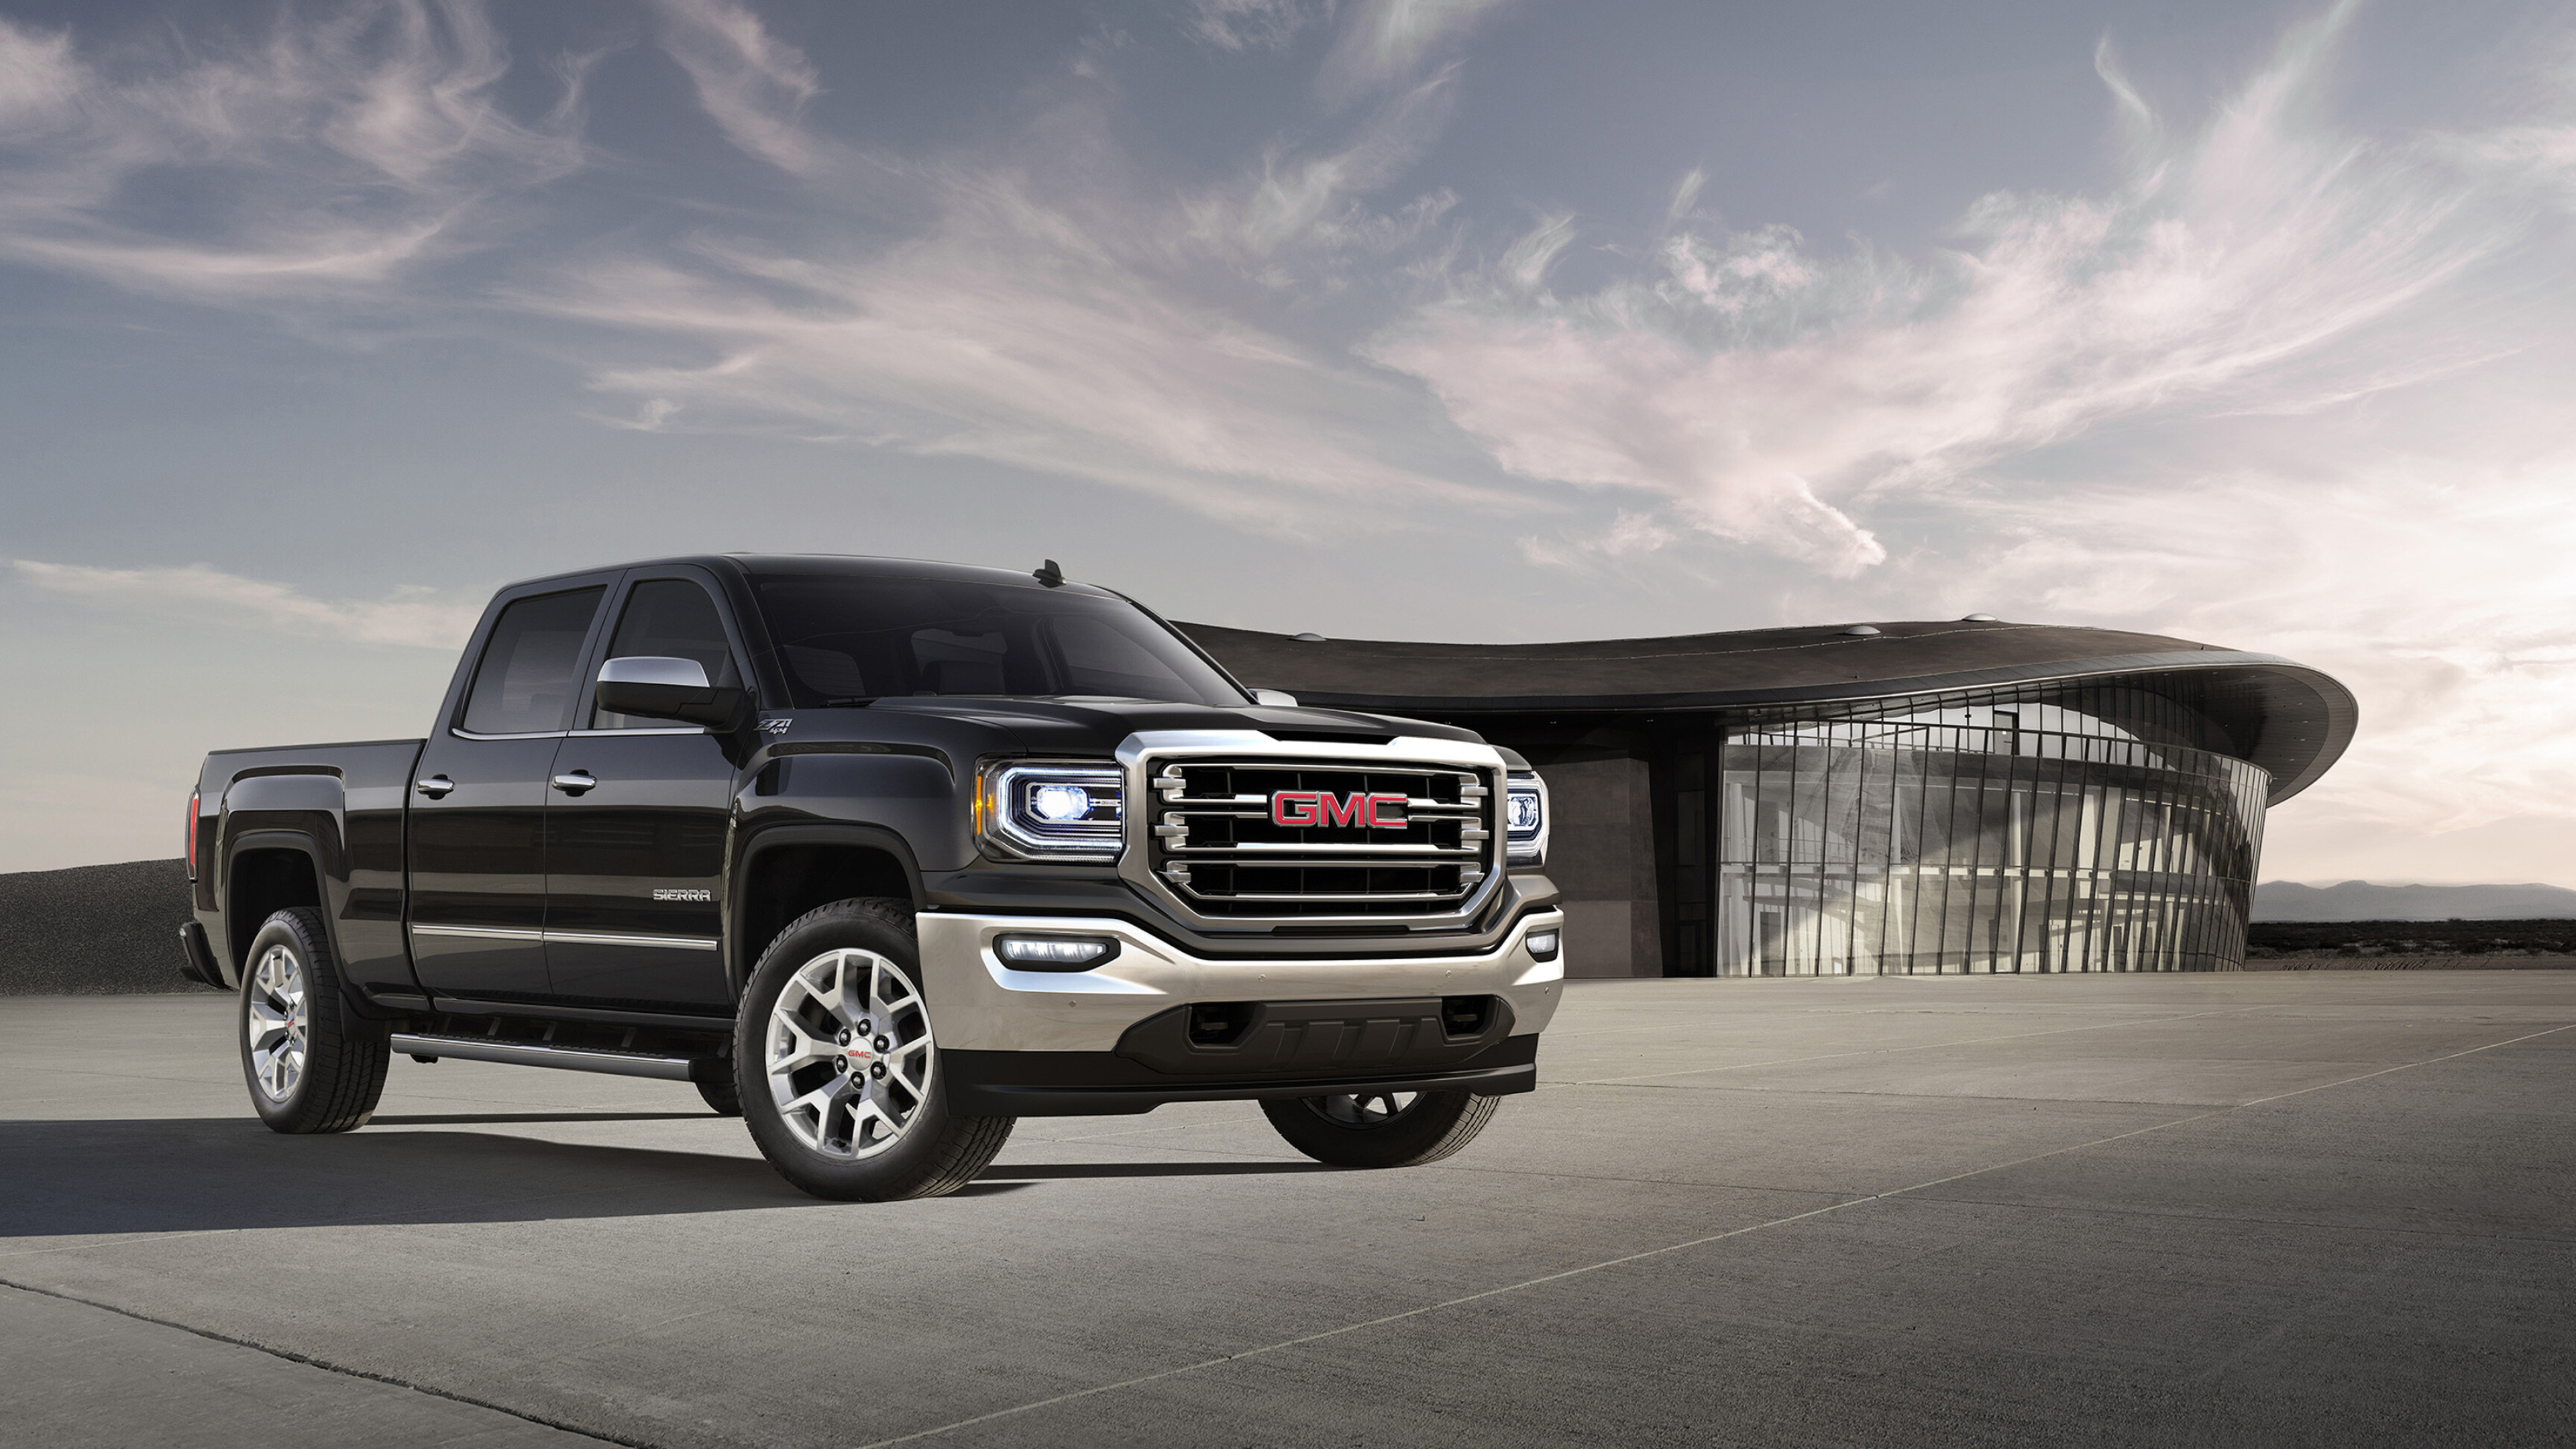 GMC: Sierra 1500 SLT, Off-road truck, Beautiful styling, Authentic materials and thoughtfully crafted details. 3840x2160 4K Background.